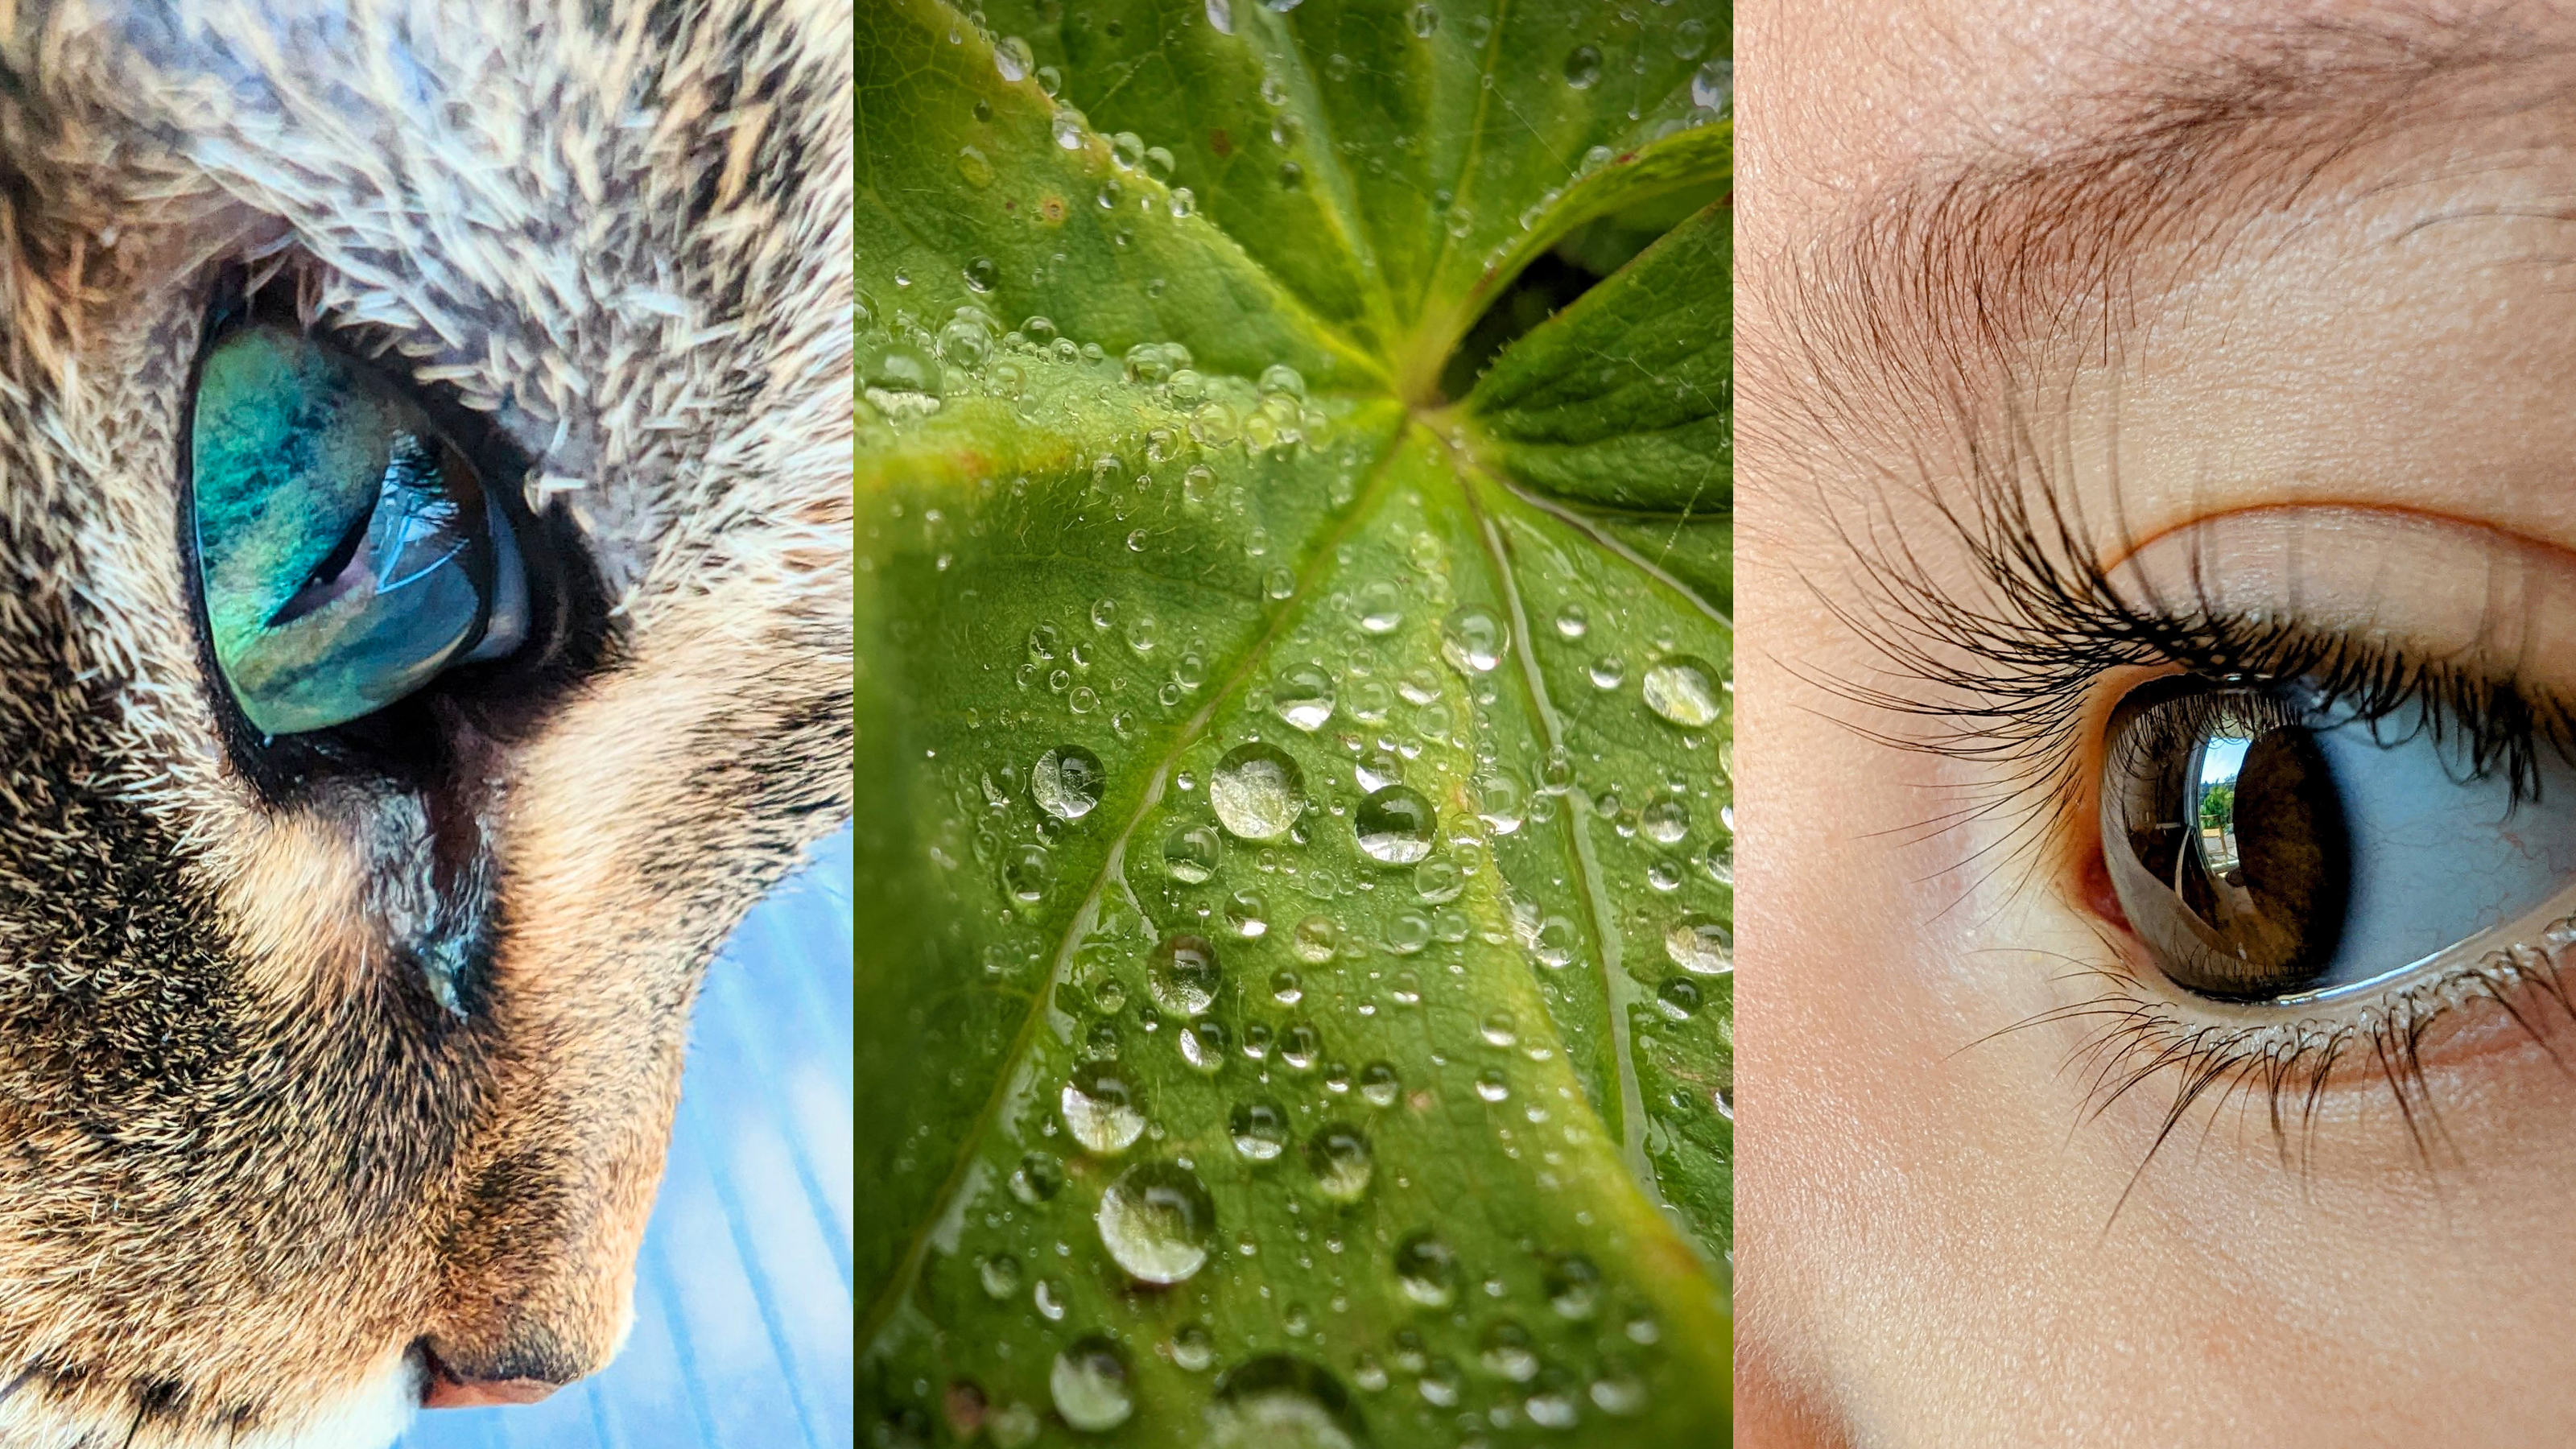 A cat's eye, water droplets on a leaf and a human eye